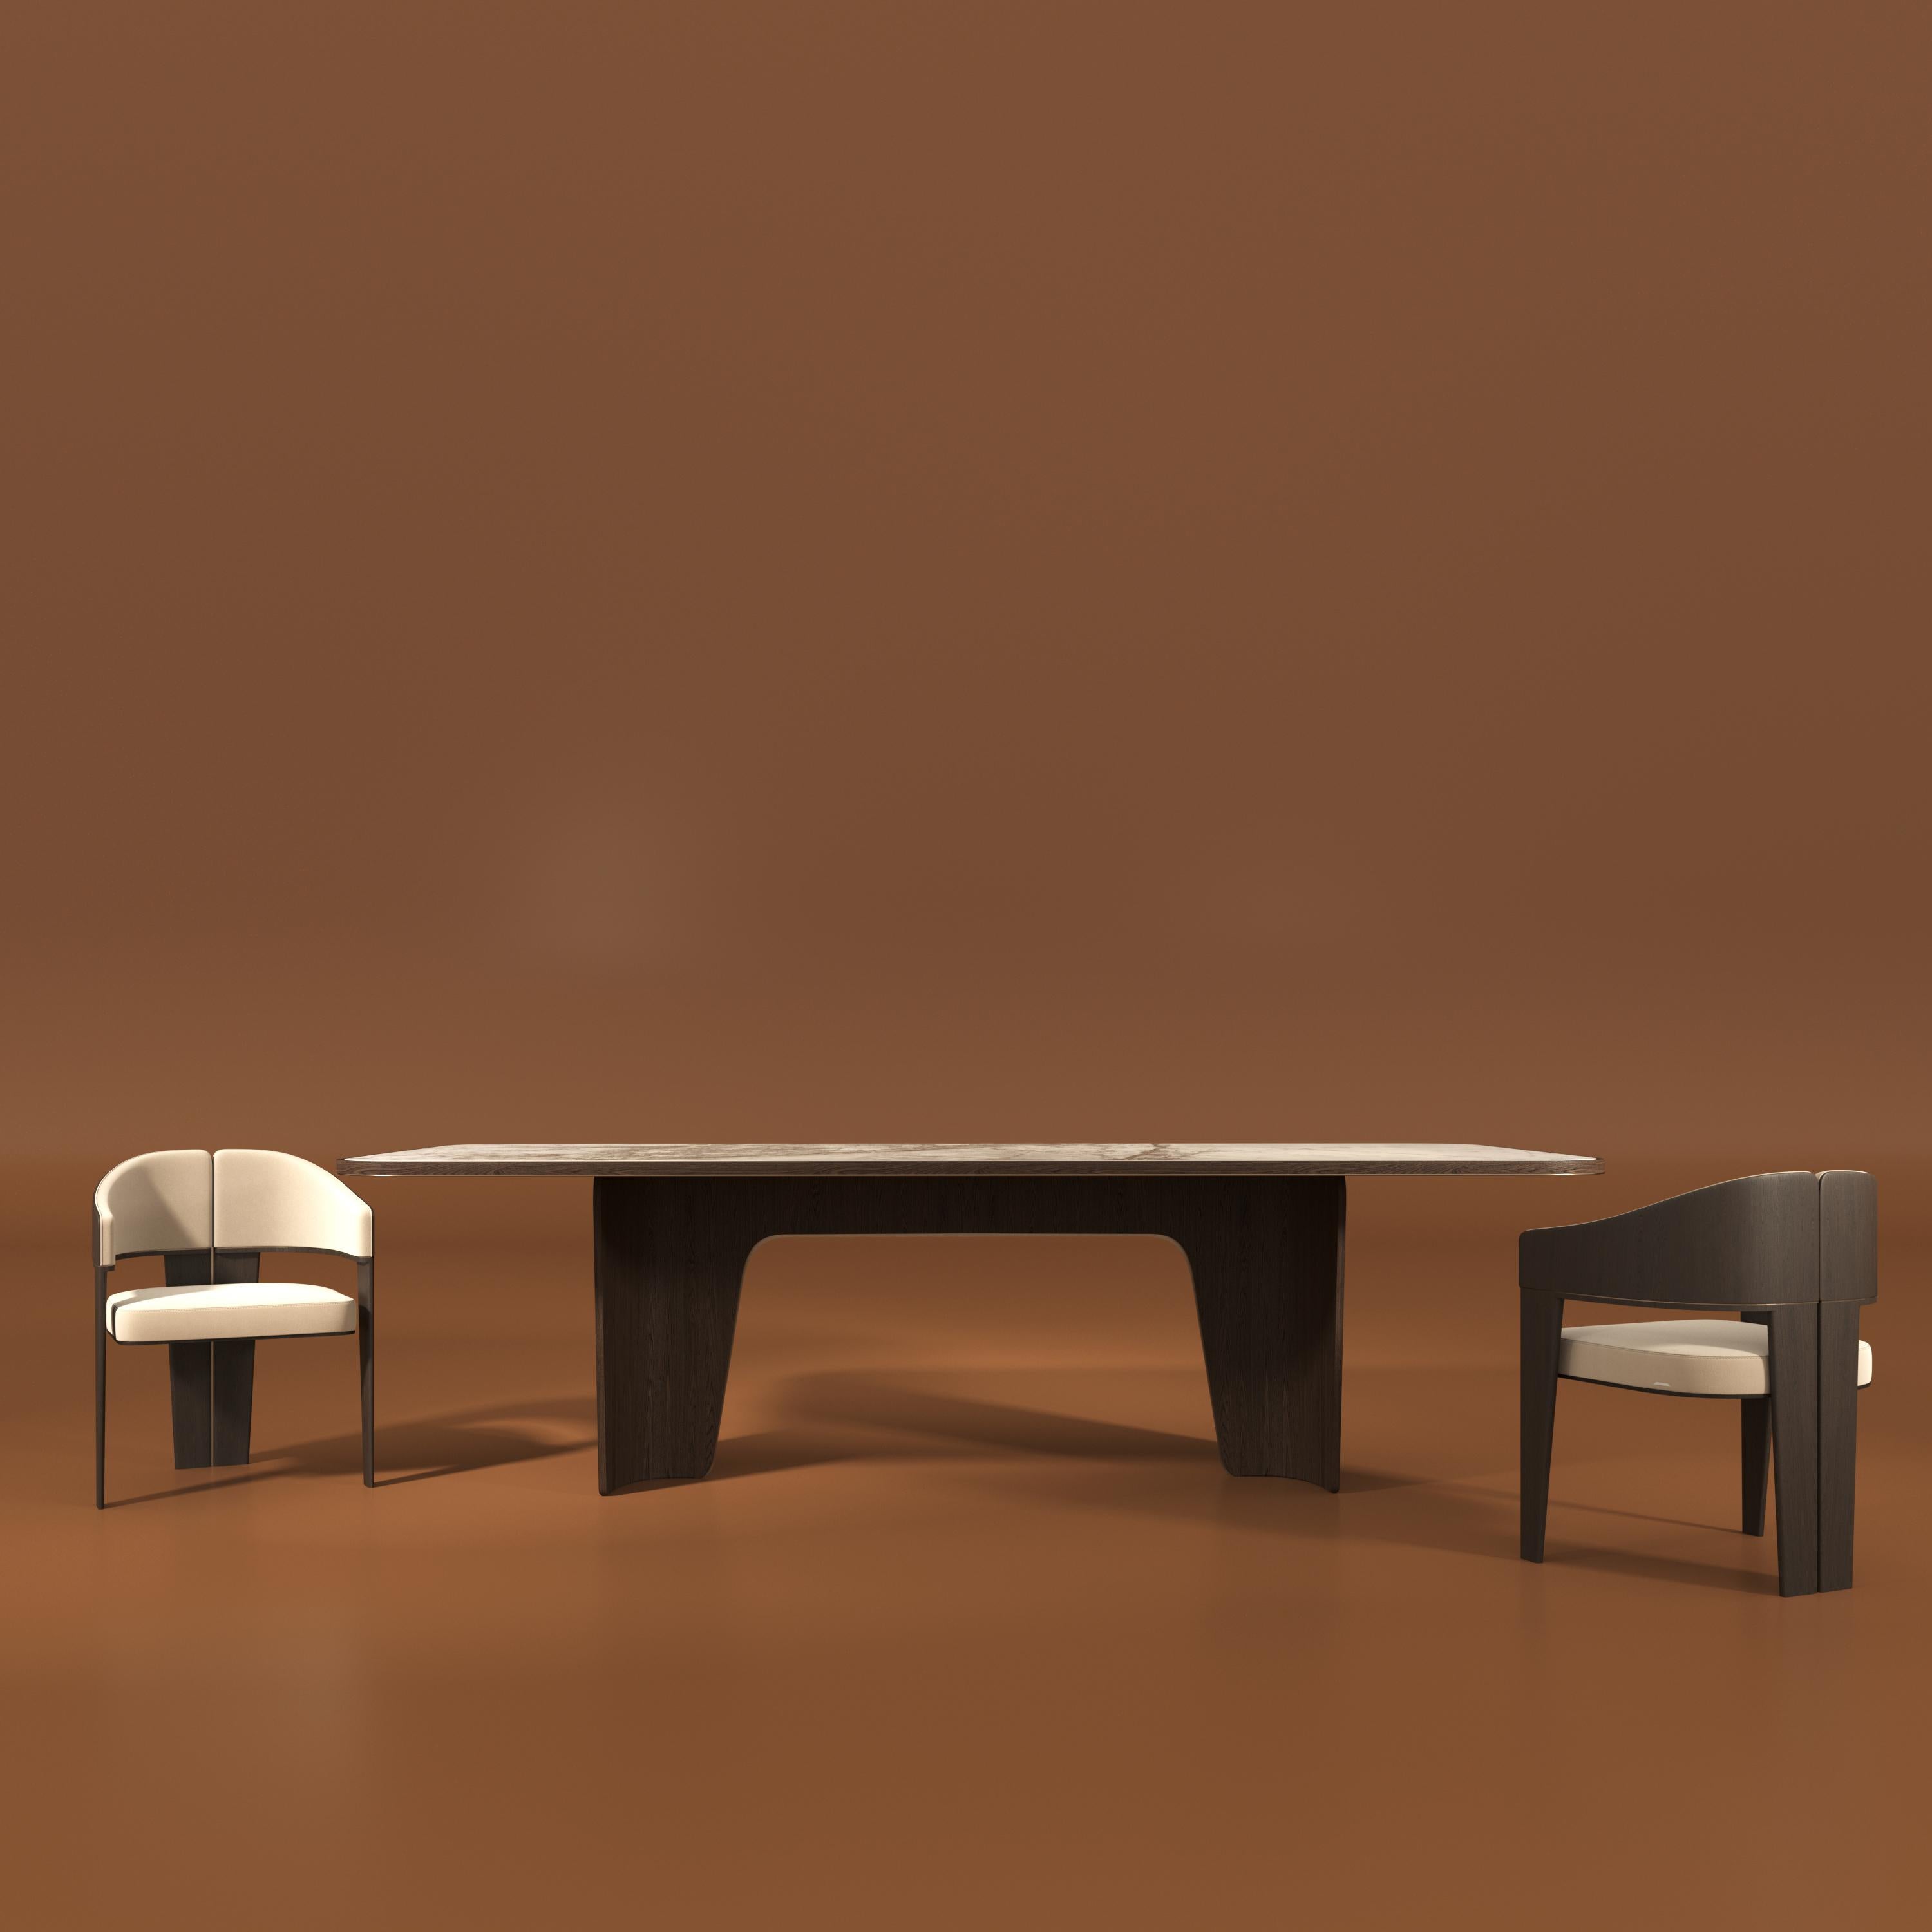 Turkish Estella Dinning Table Design By Mehmet Orel for Capella For Sale